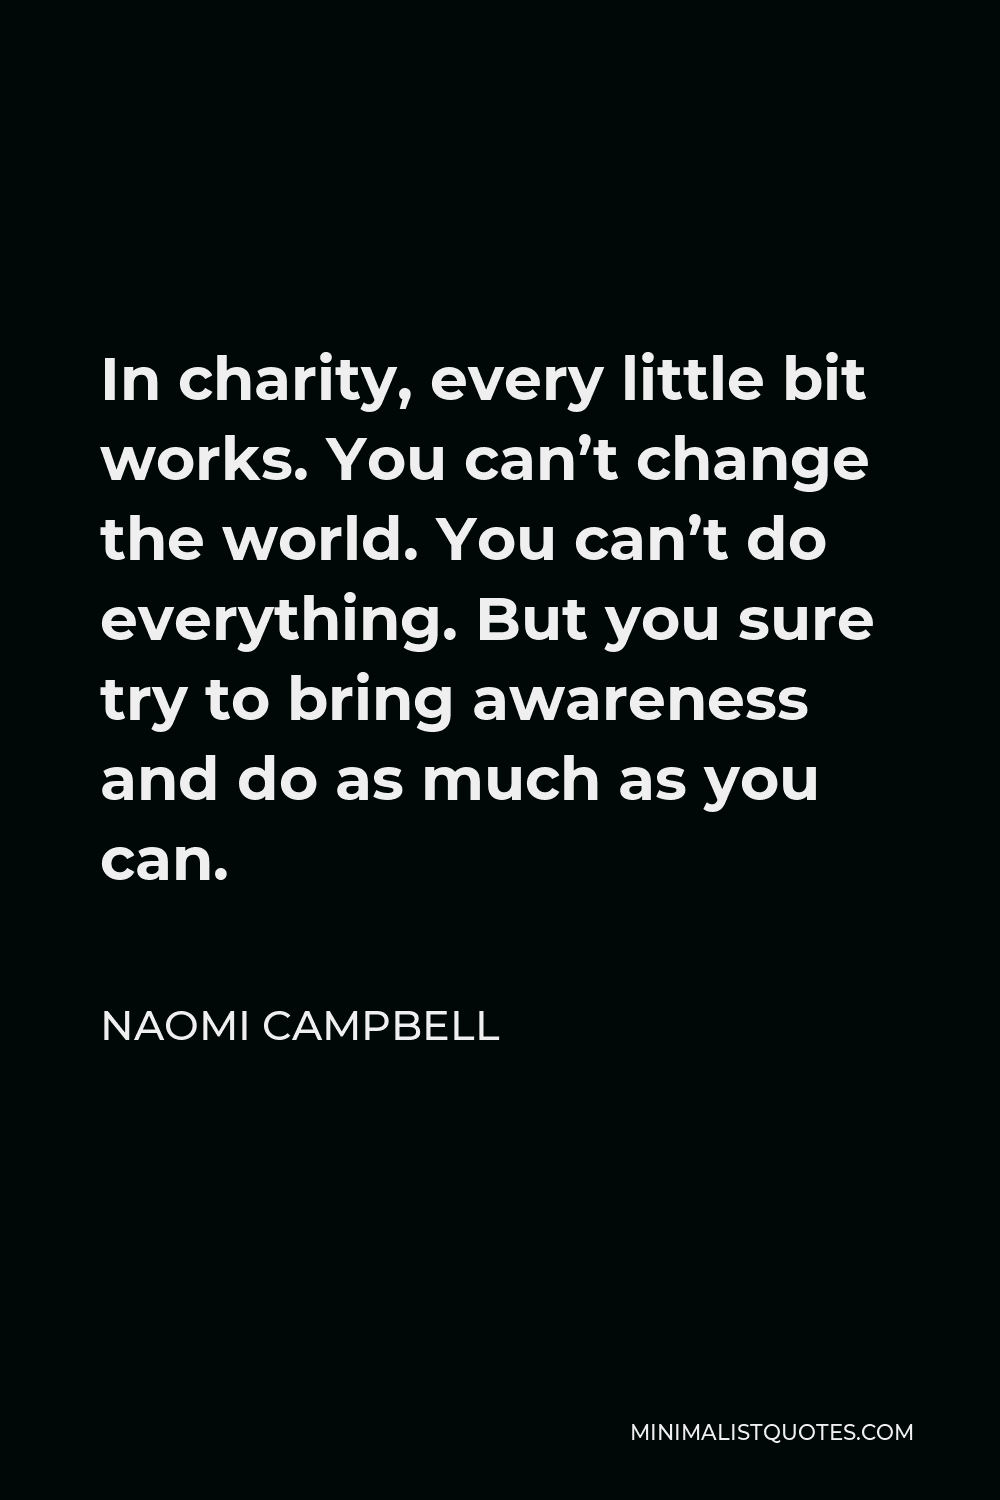 Naomi Campbell Quote - In charity, every little bit works. You can’t change the world. You can’t do everything. But you sure try to bring awareness and do as much as you can.